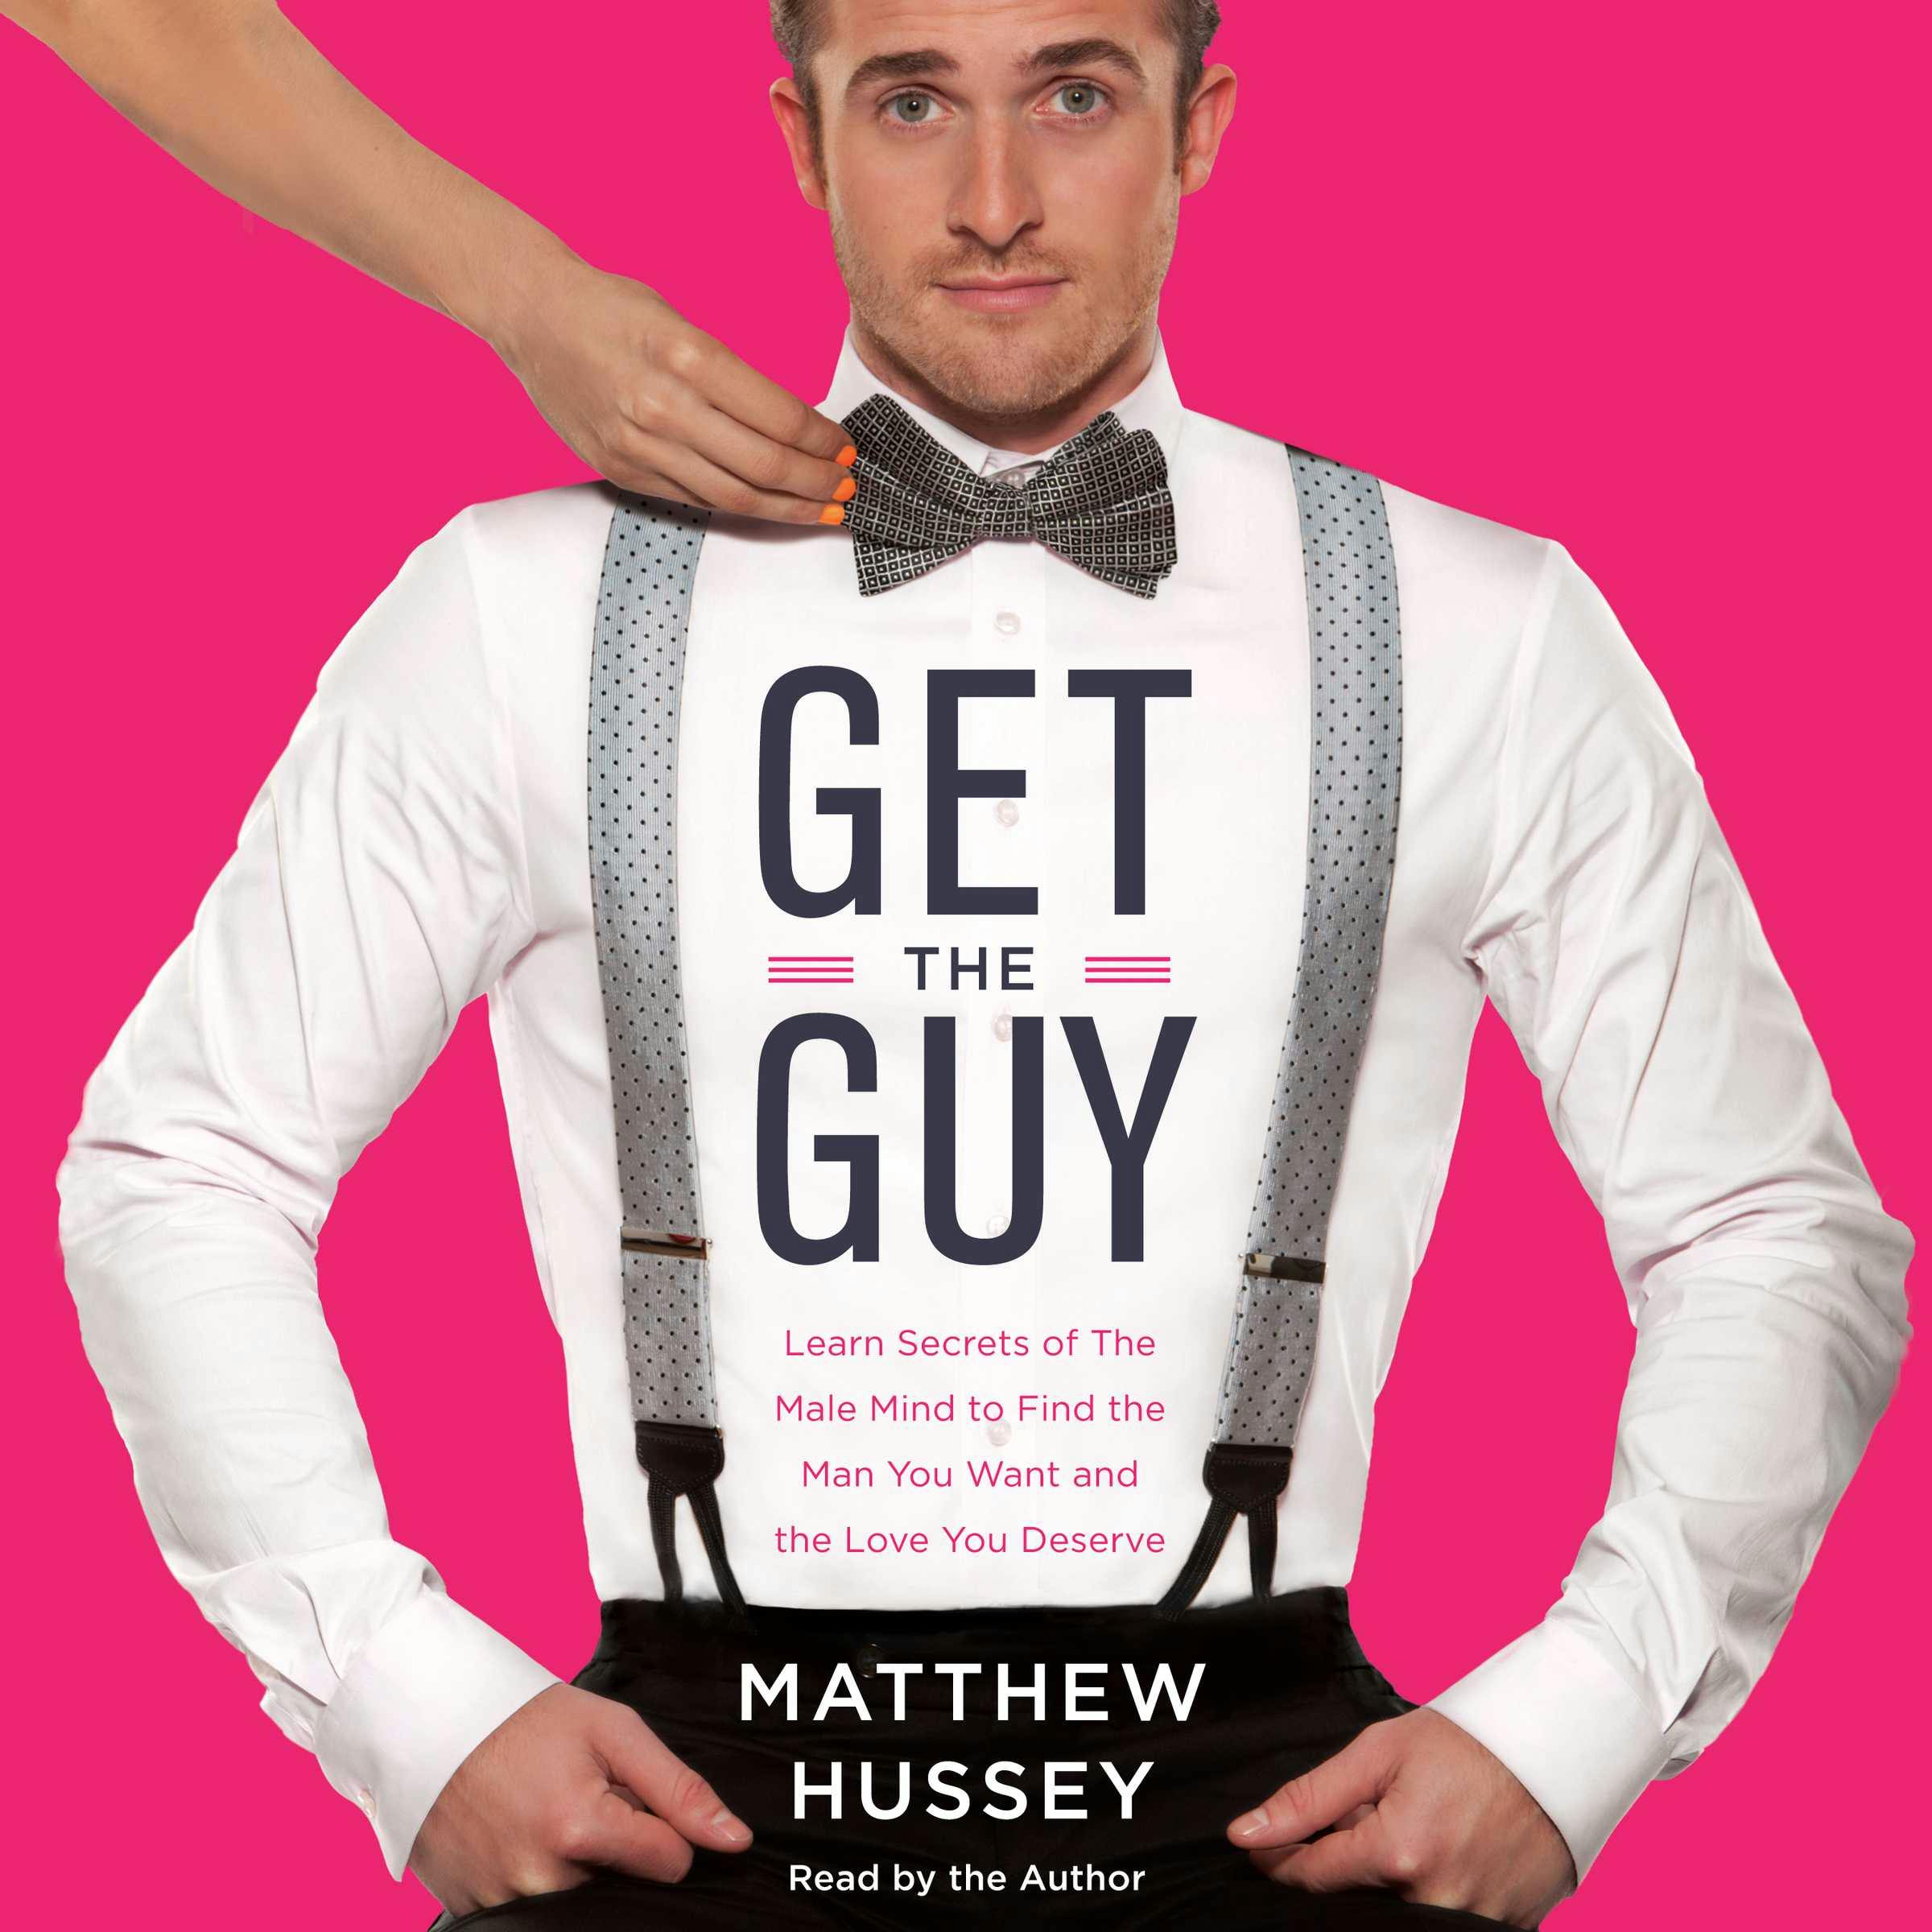 Get the Guy: Learn Secrets of the Male Mind to Find the Man You Want and the Love You Deserve - Matthew Hussey